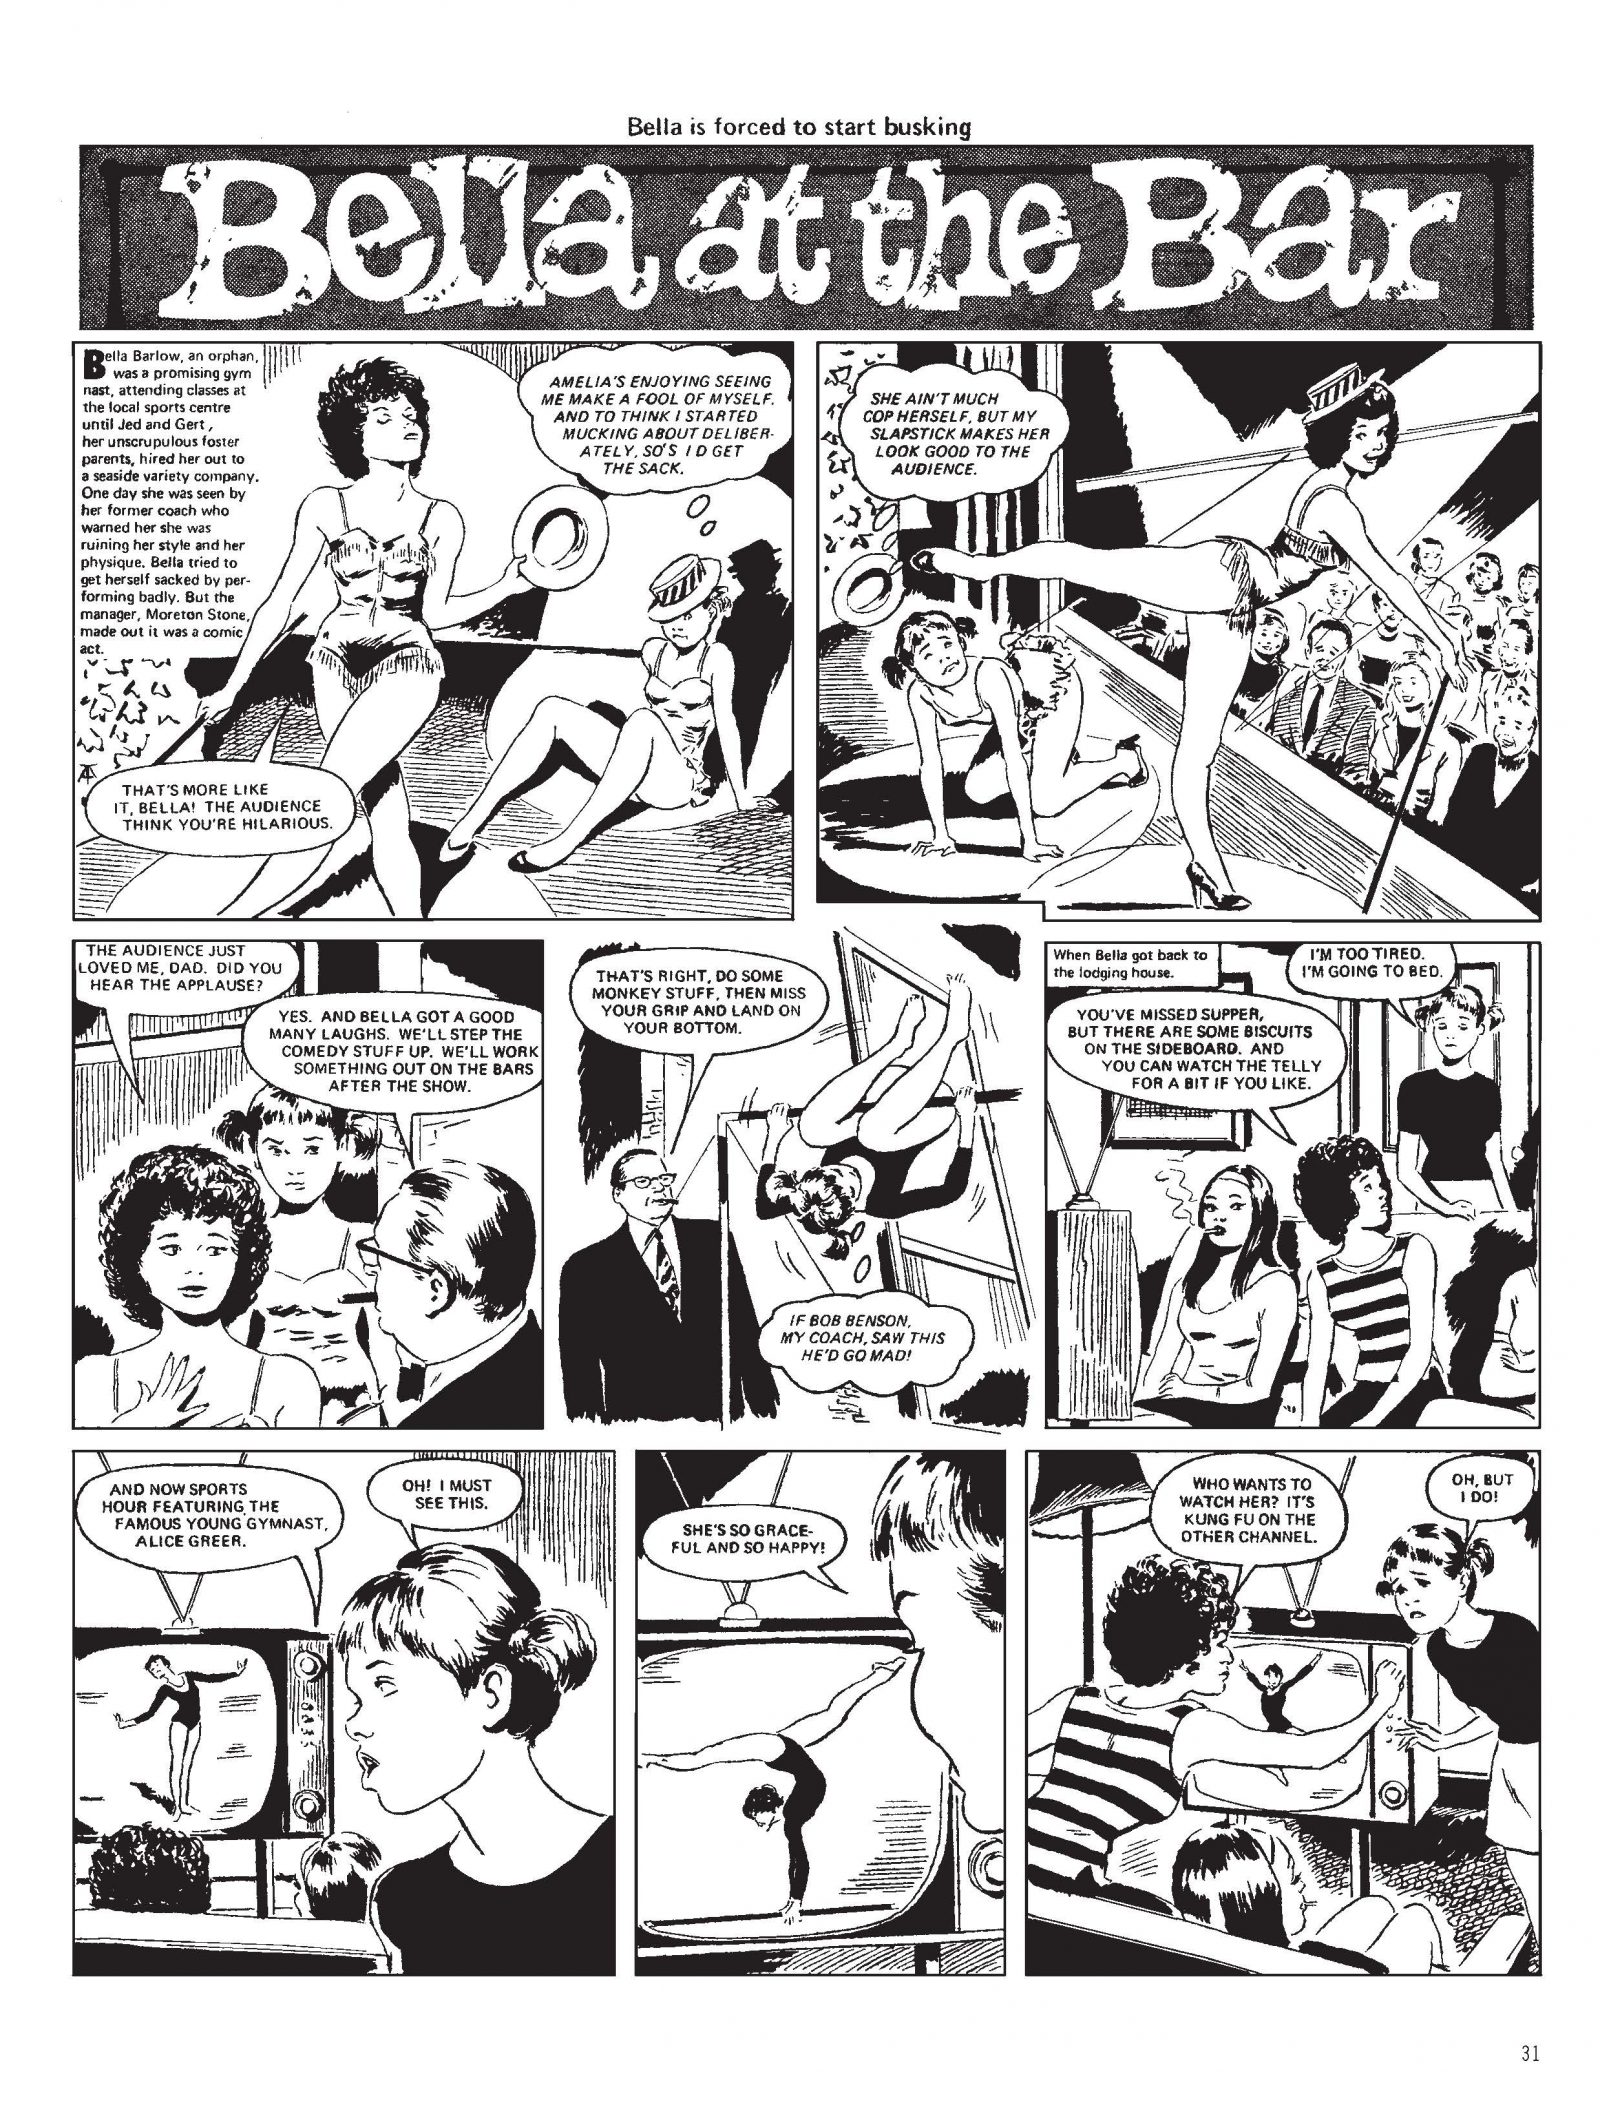 The influence of the popularity of gymnastics on TV in the early 1970s is apparent even in the strip